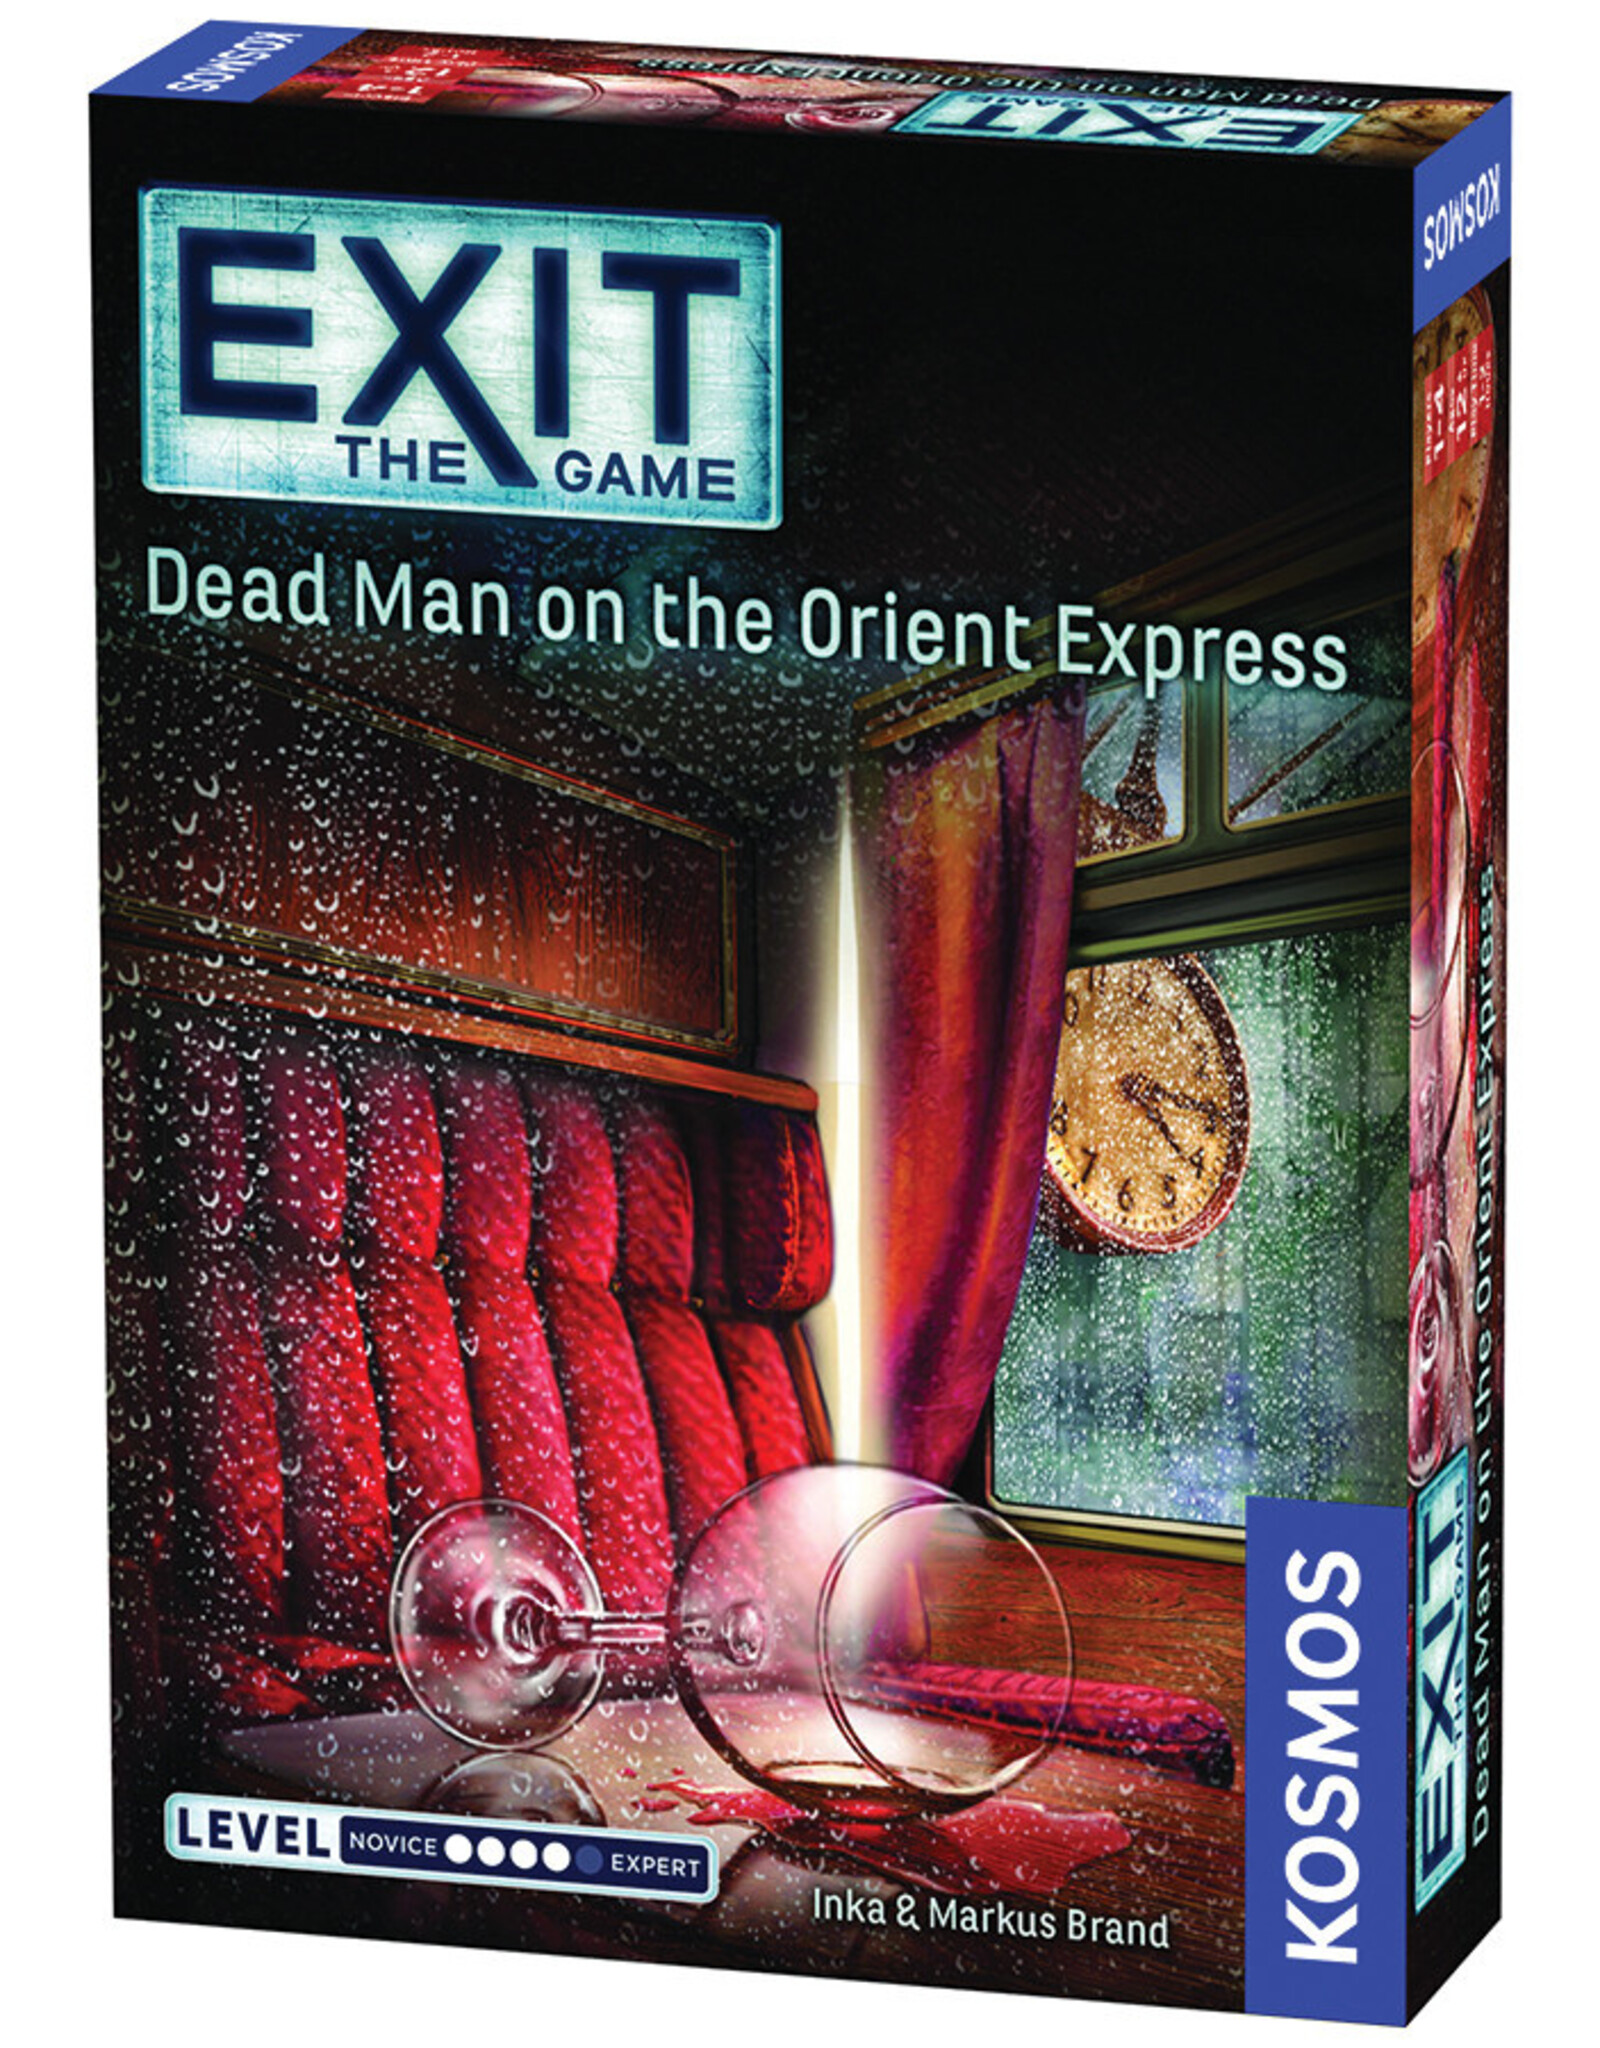 Thames & Kosmos Exit: Dead Man on the Orient Express